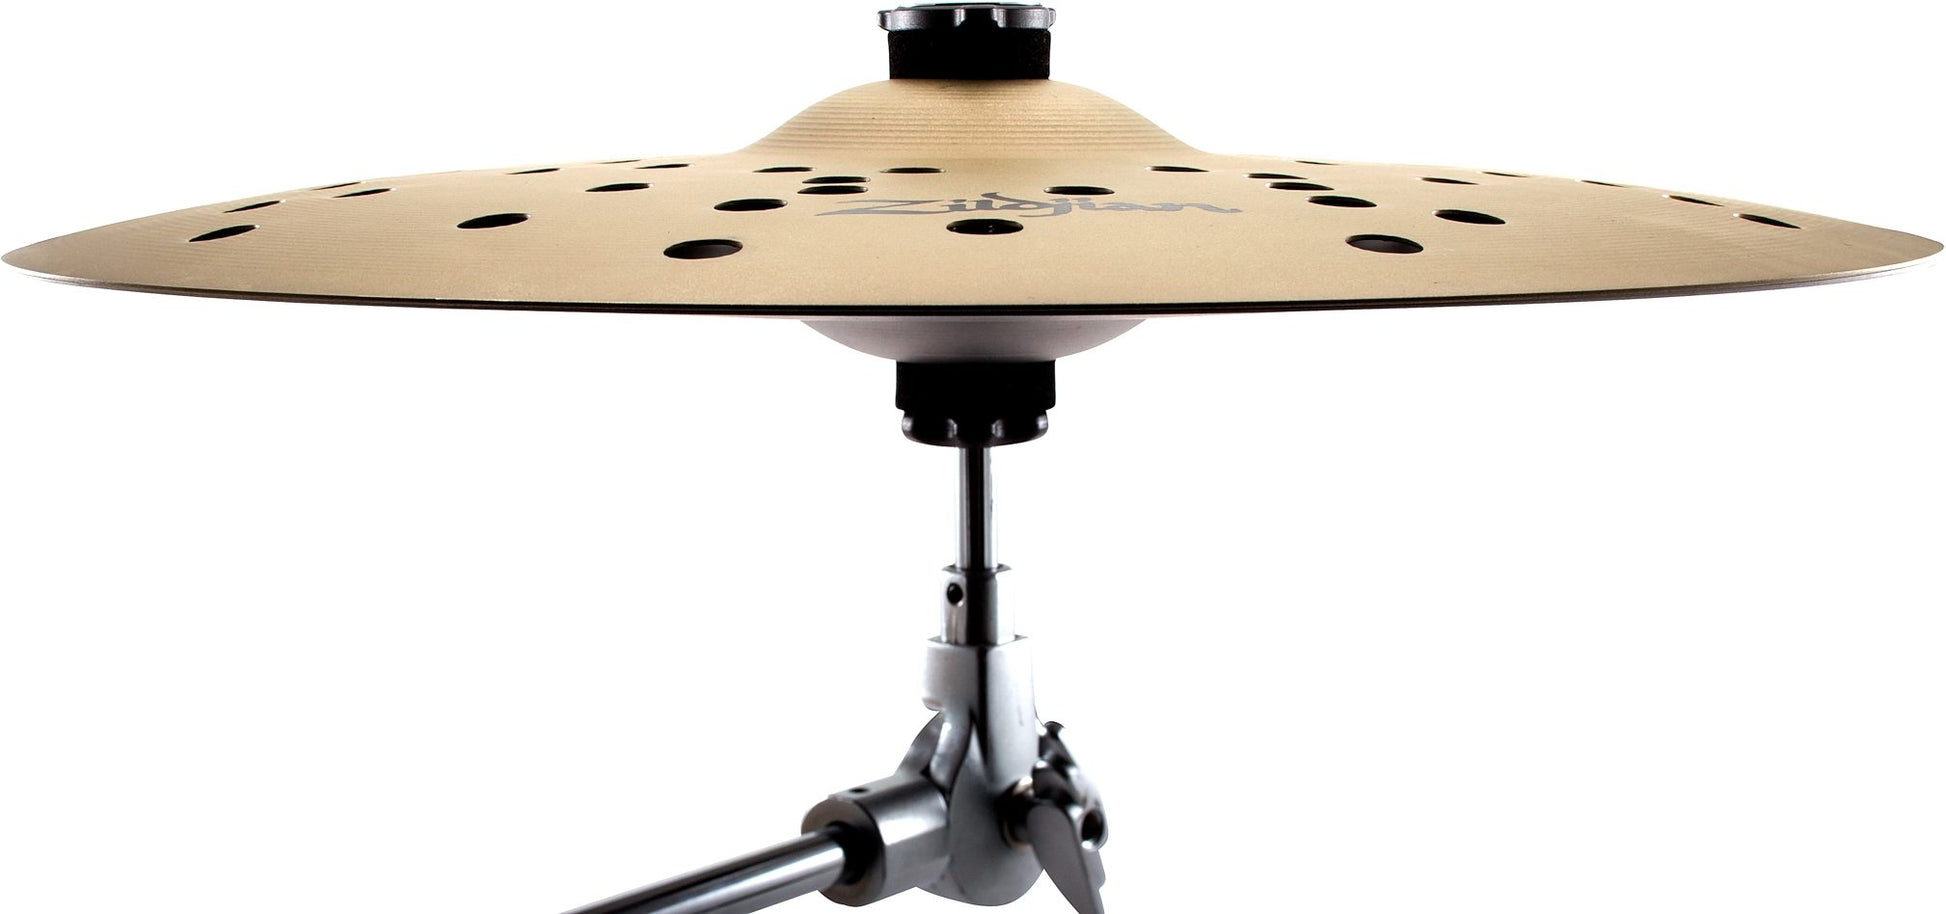 Zildjian FX Stack Hi-Hat Cymbal Pair (with Mount), 16 Inch